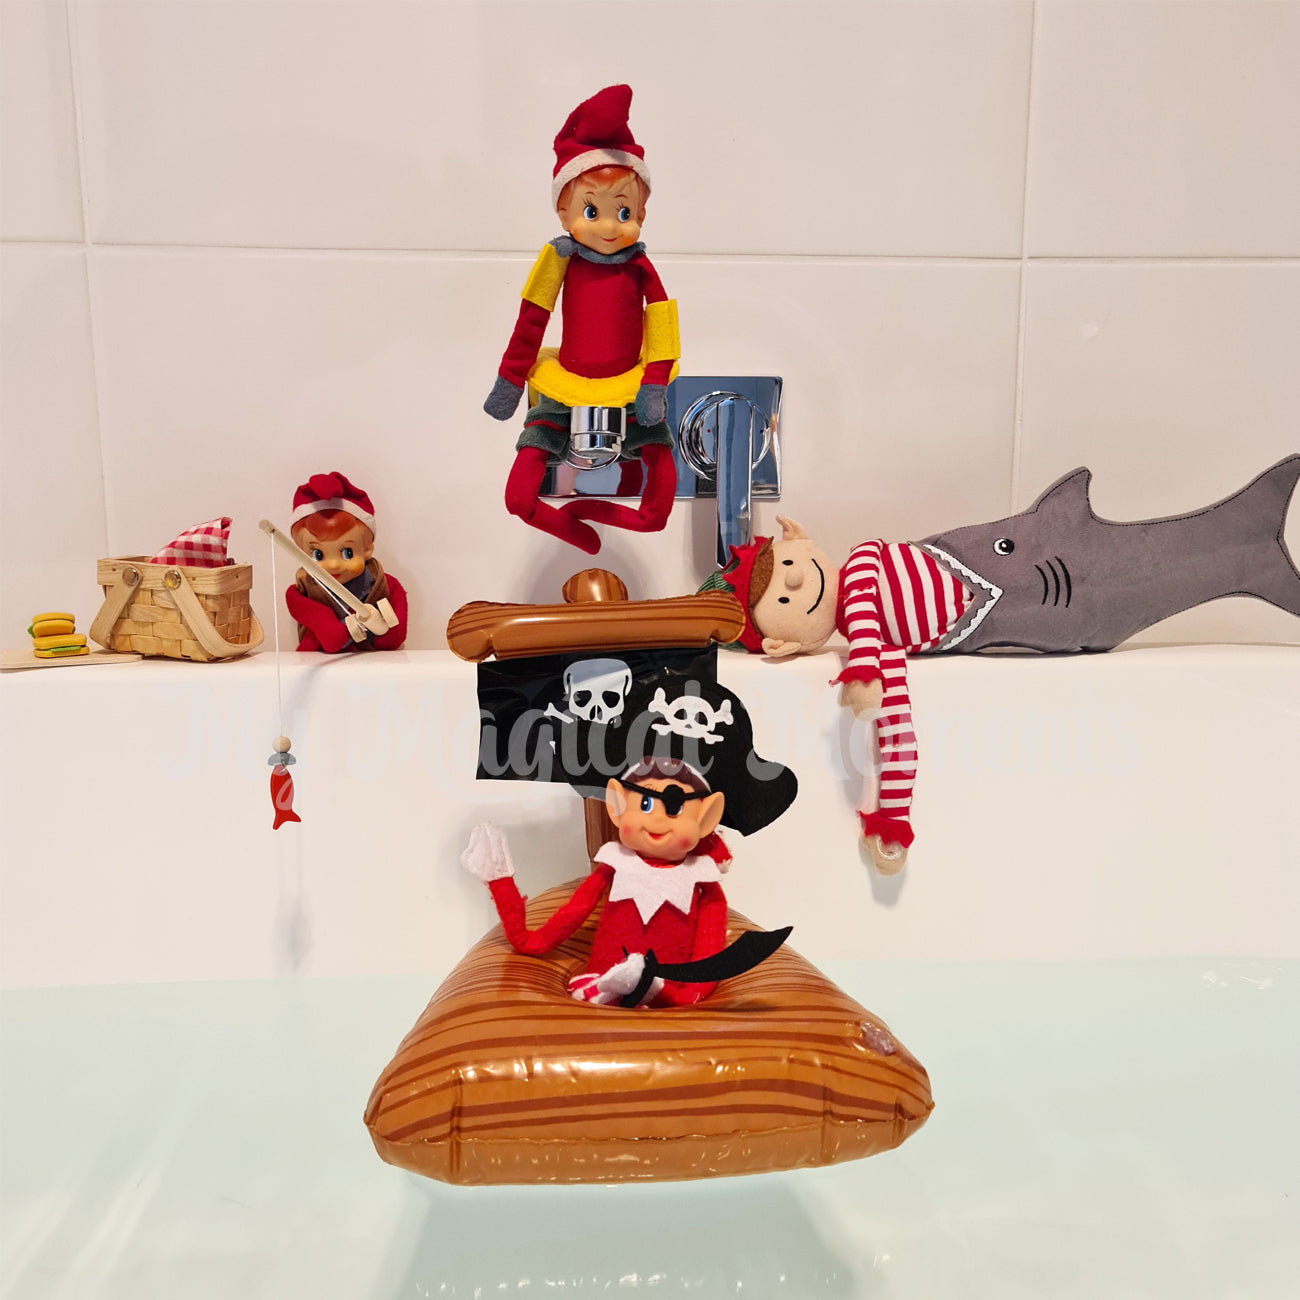 Elf scene in bath tub. Featuring elves behavin badly in a floating pirate ship. A shark eating costume and a elf fishing with a miniature rod